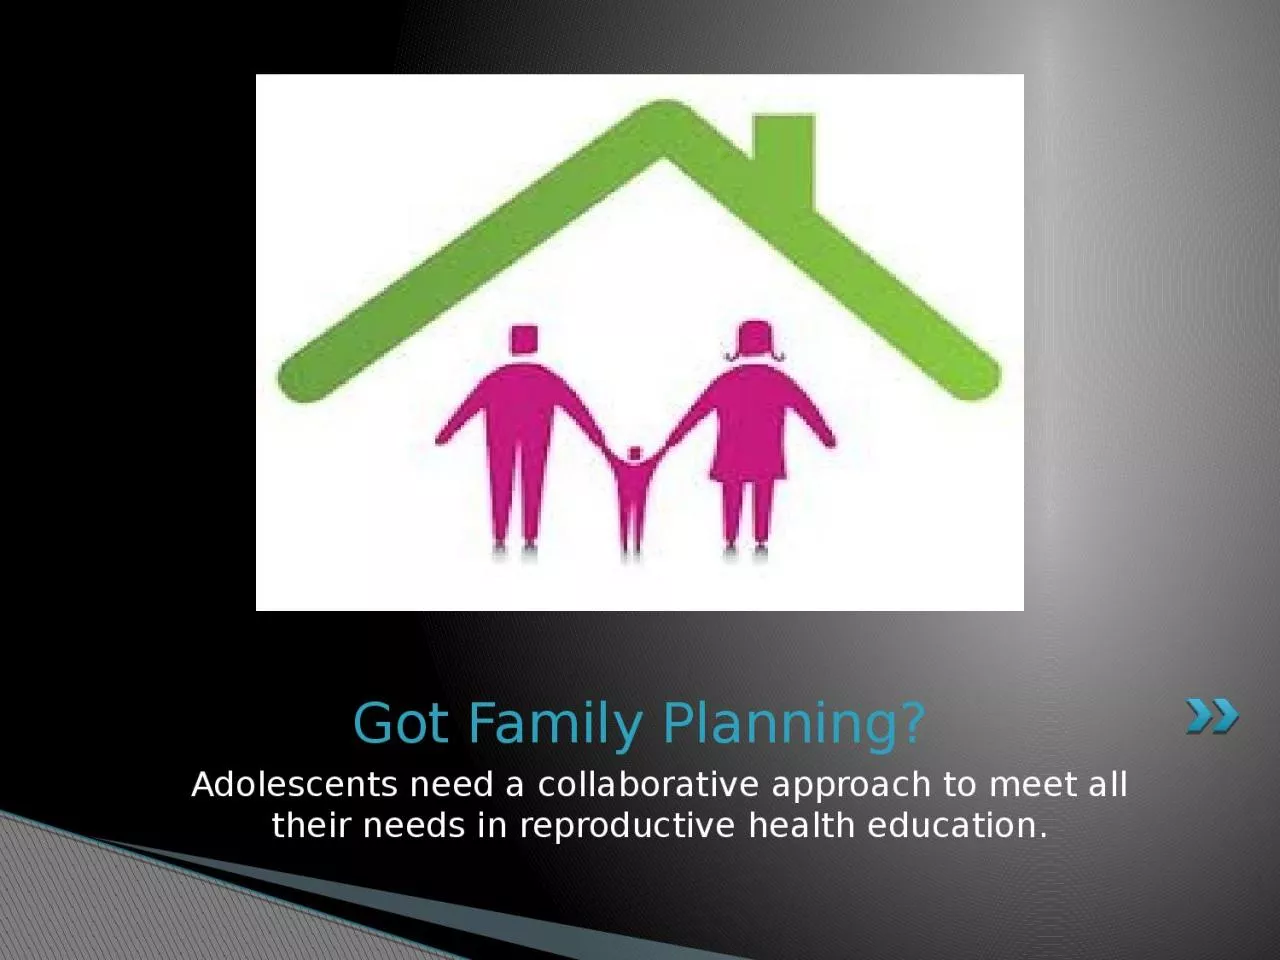 Adolescents need a collaborative approach to meet all their needs in reproductive health